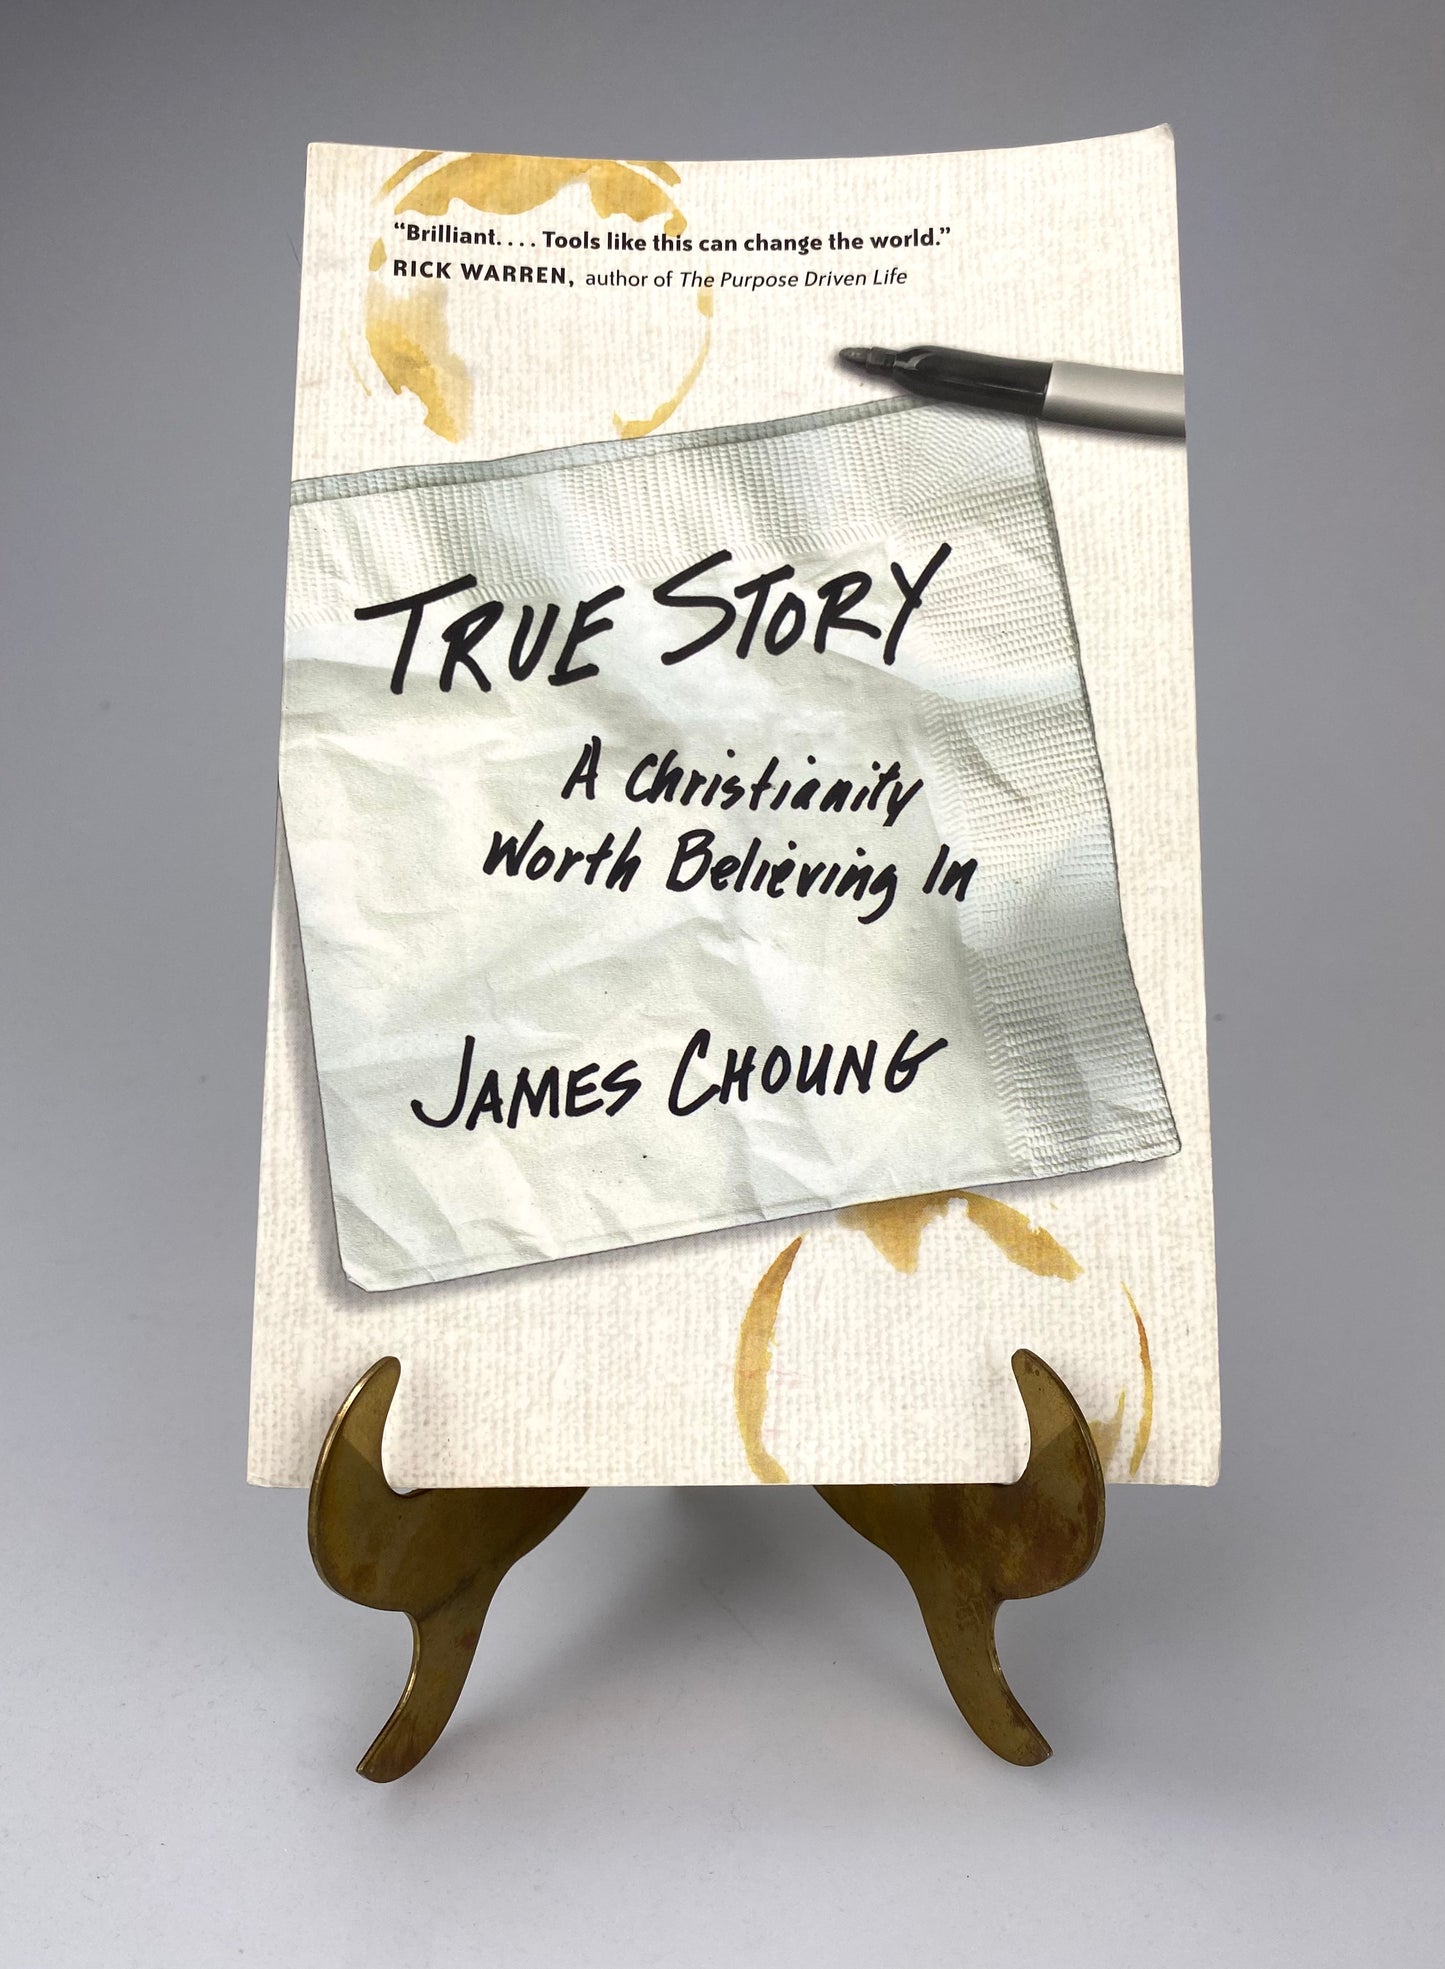 True Story: A Christianity Worth Believing In by James Choung